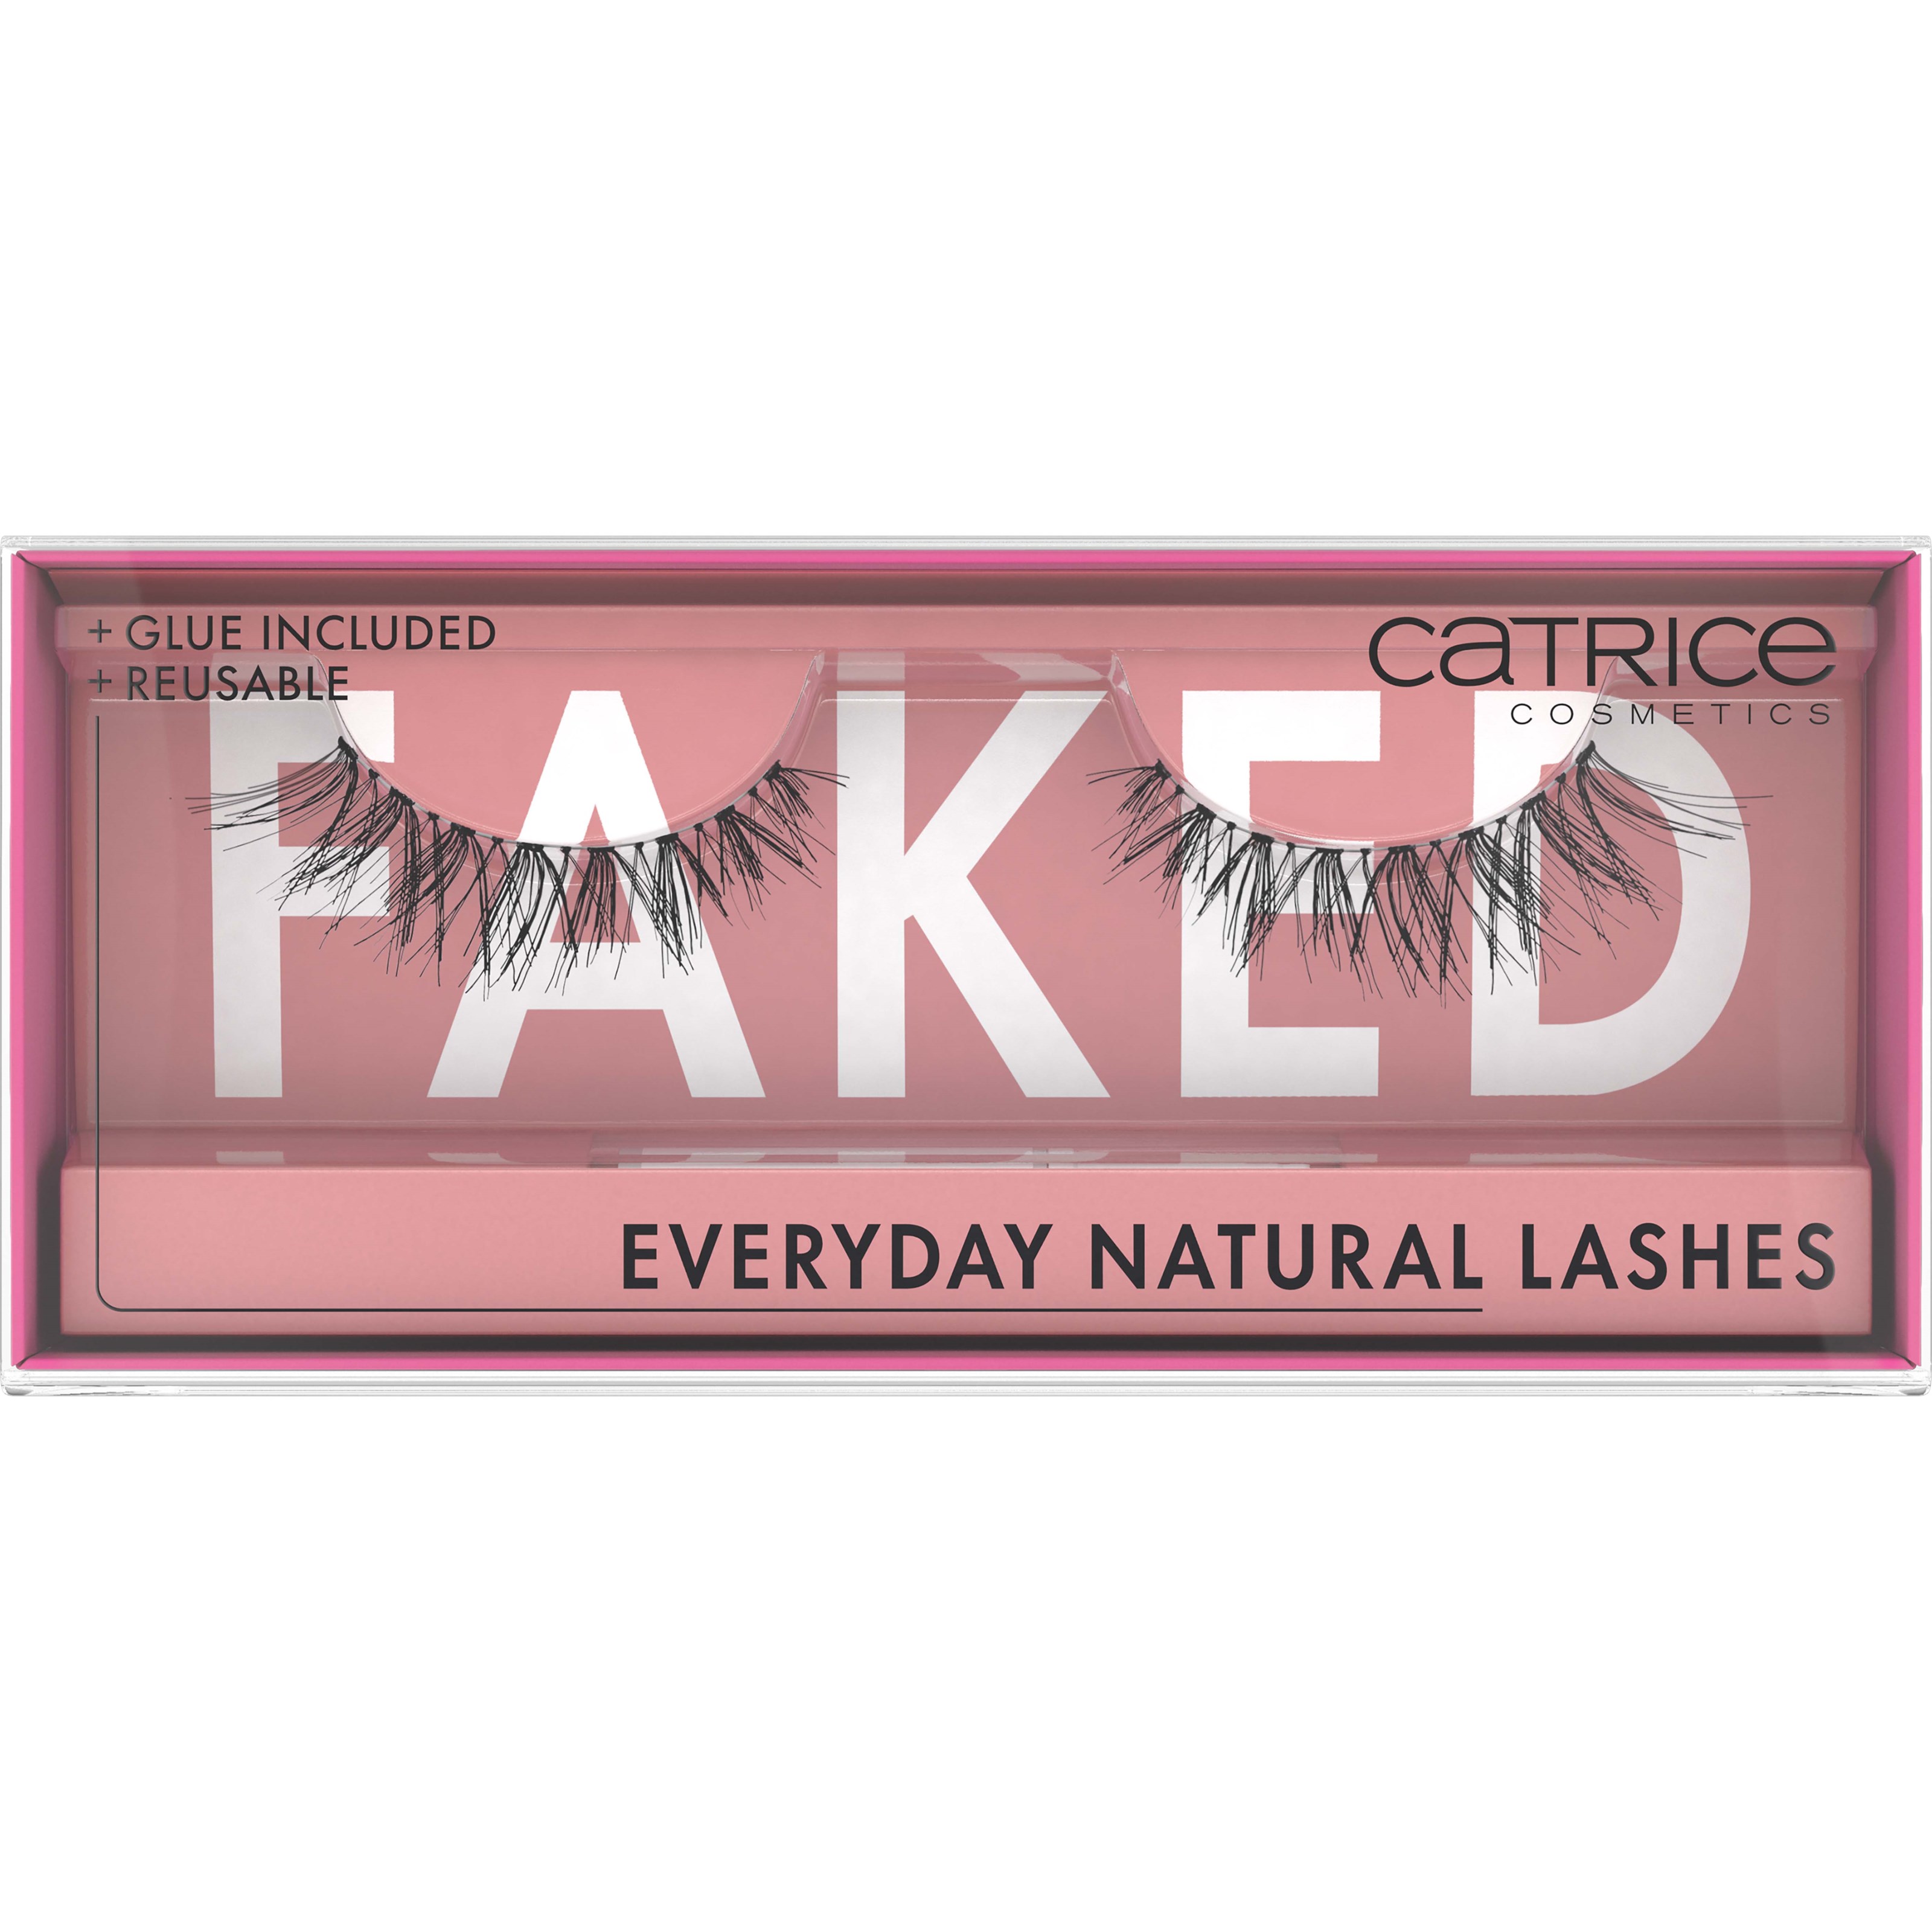 Läs mer om Catrice Faked Everyday Natural Lashes